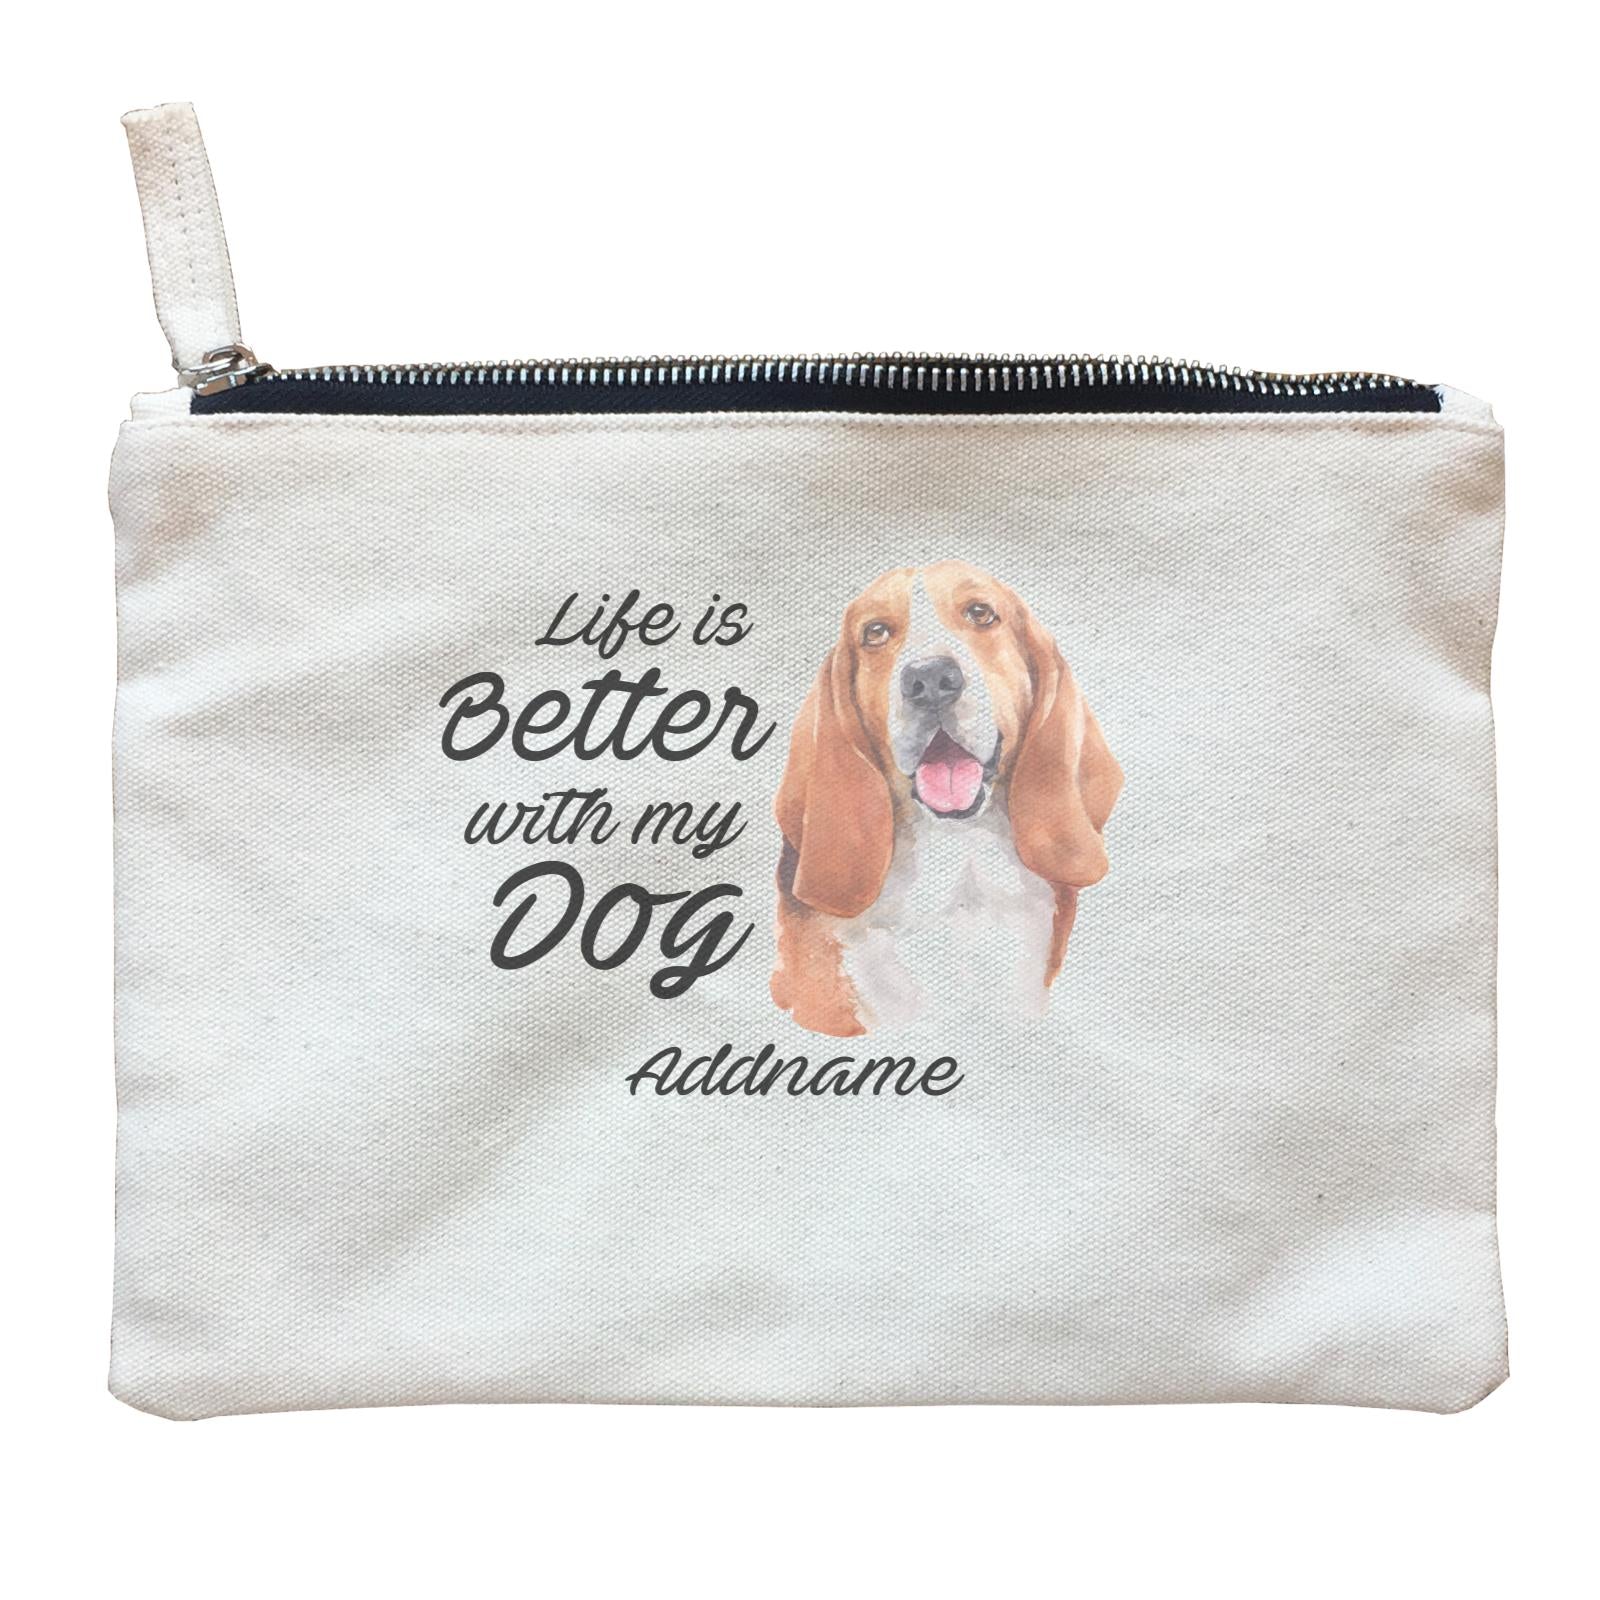 Watercolor Life is Better With My Dog Basset Hound Addname Zipper Pouch